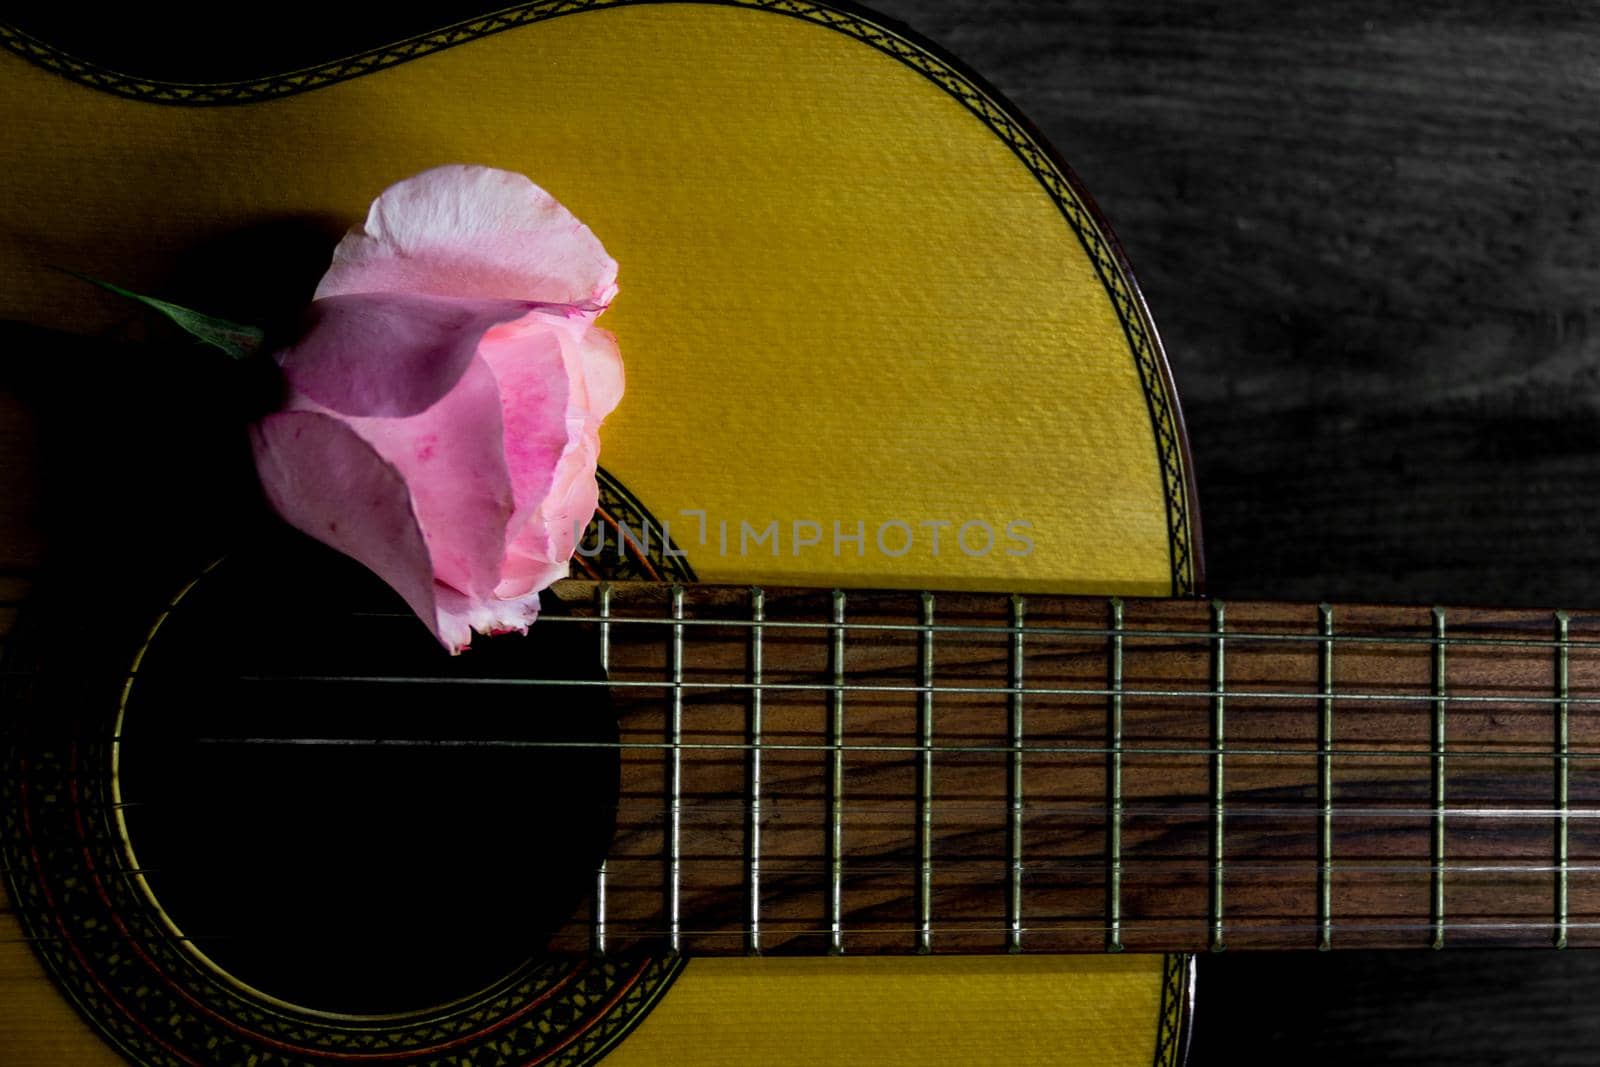 a pink bud on the guitar strings by GabrielaBertolini